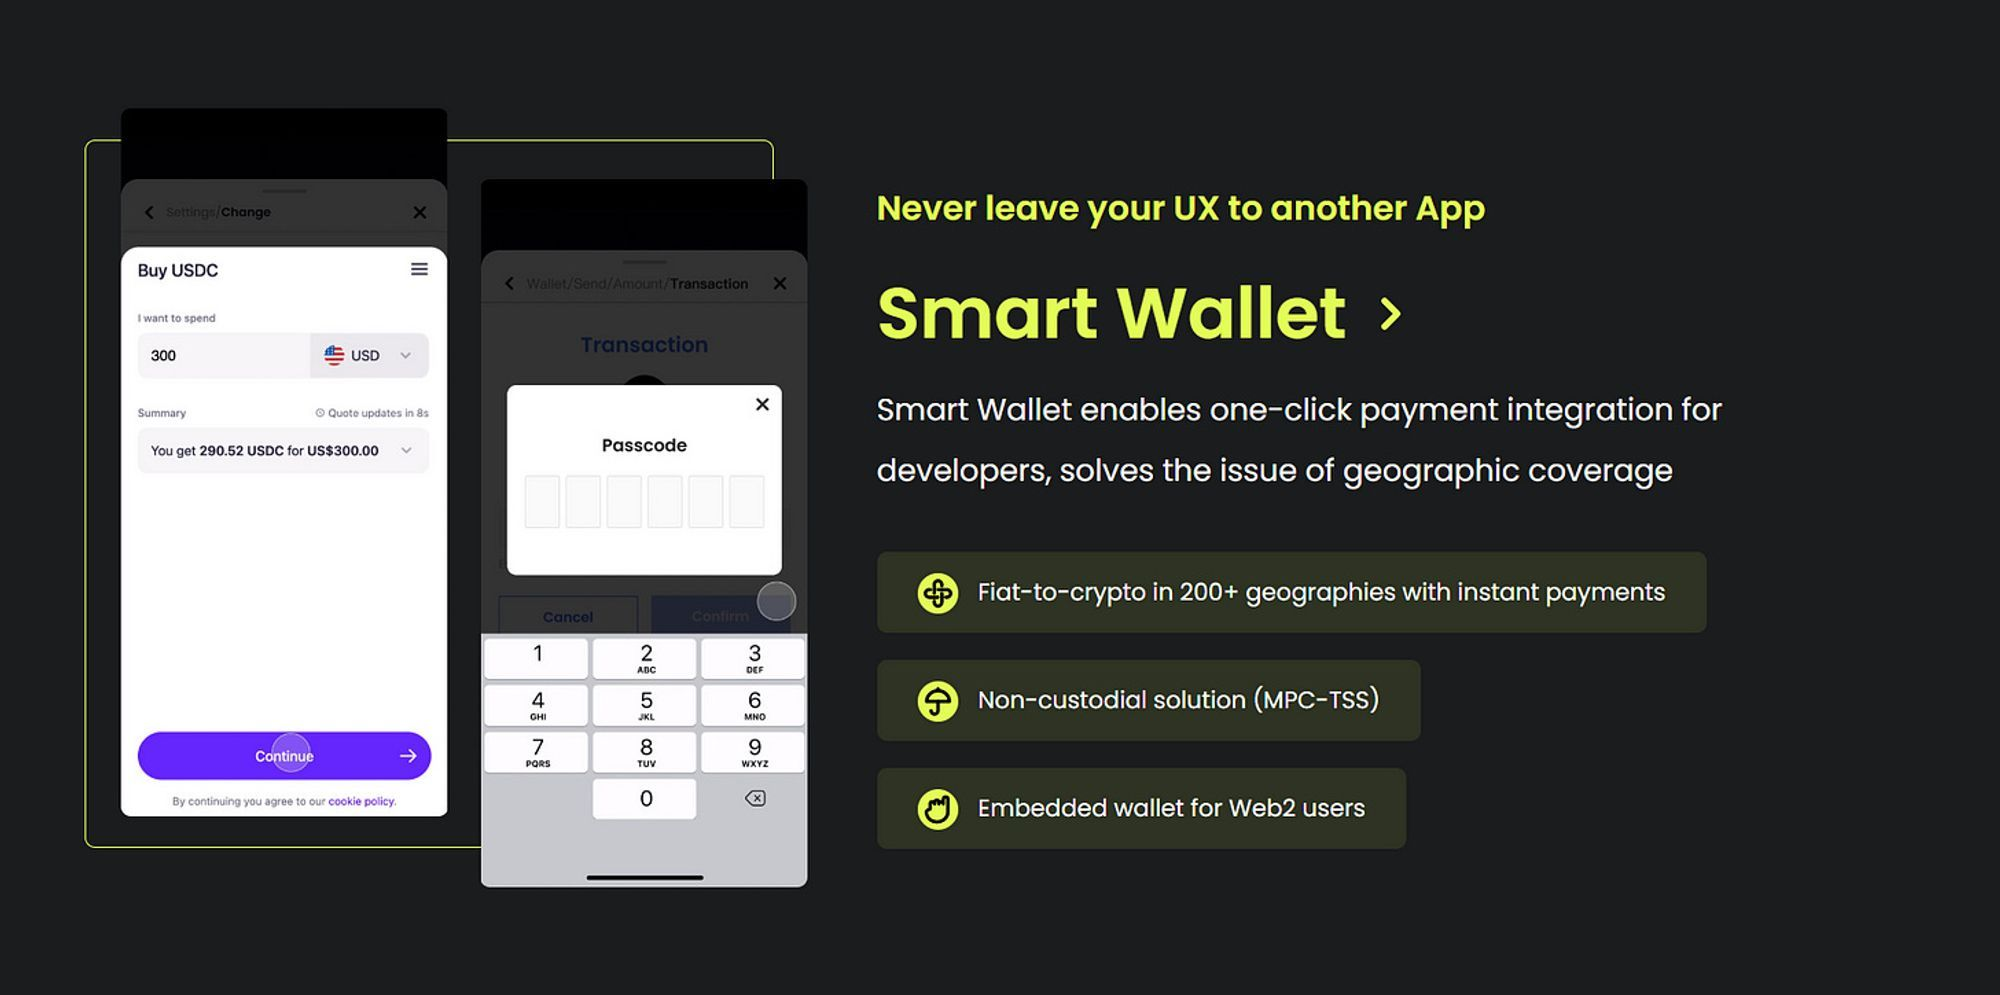 Mirror World Smart Wallet Solution allow users to store and access their digital assets securely and easily.